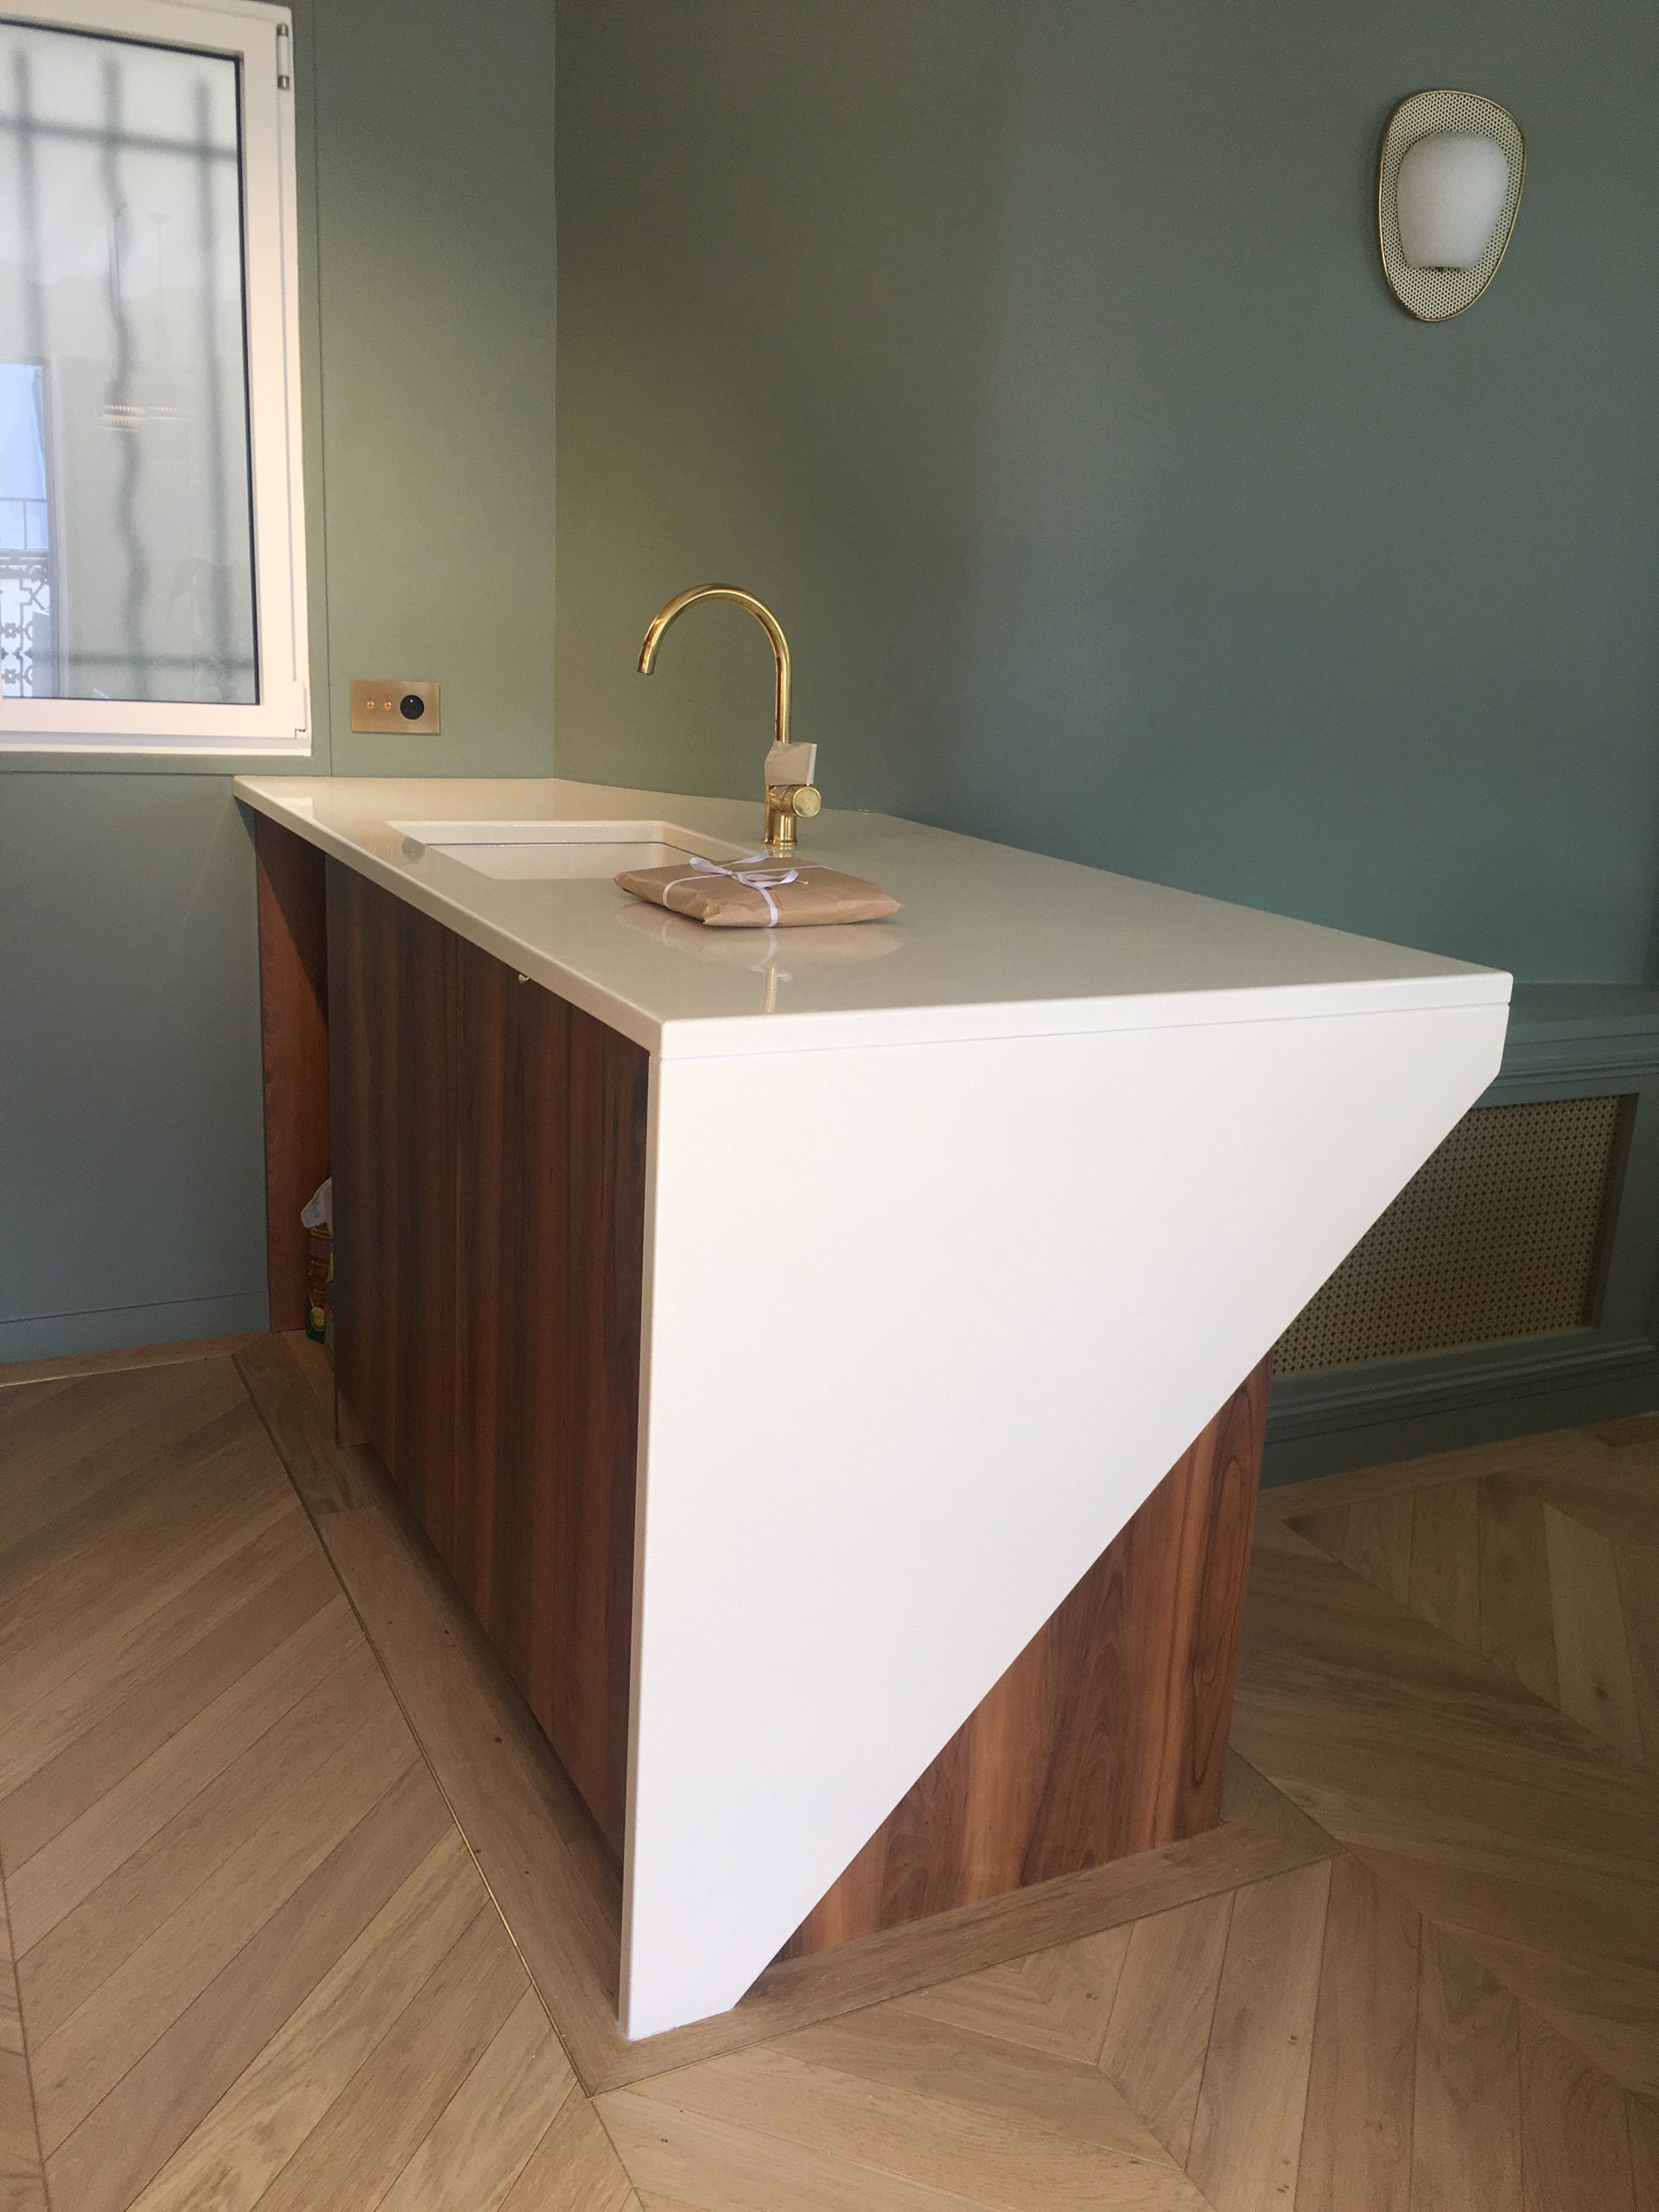 Enamelled lava stone kitchen worktop central island and washbasin in a parisian flat